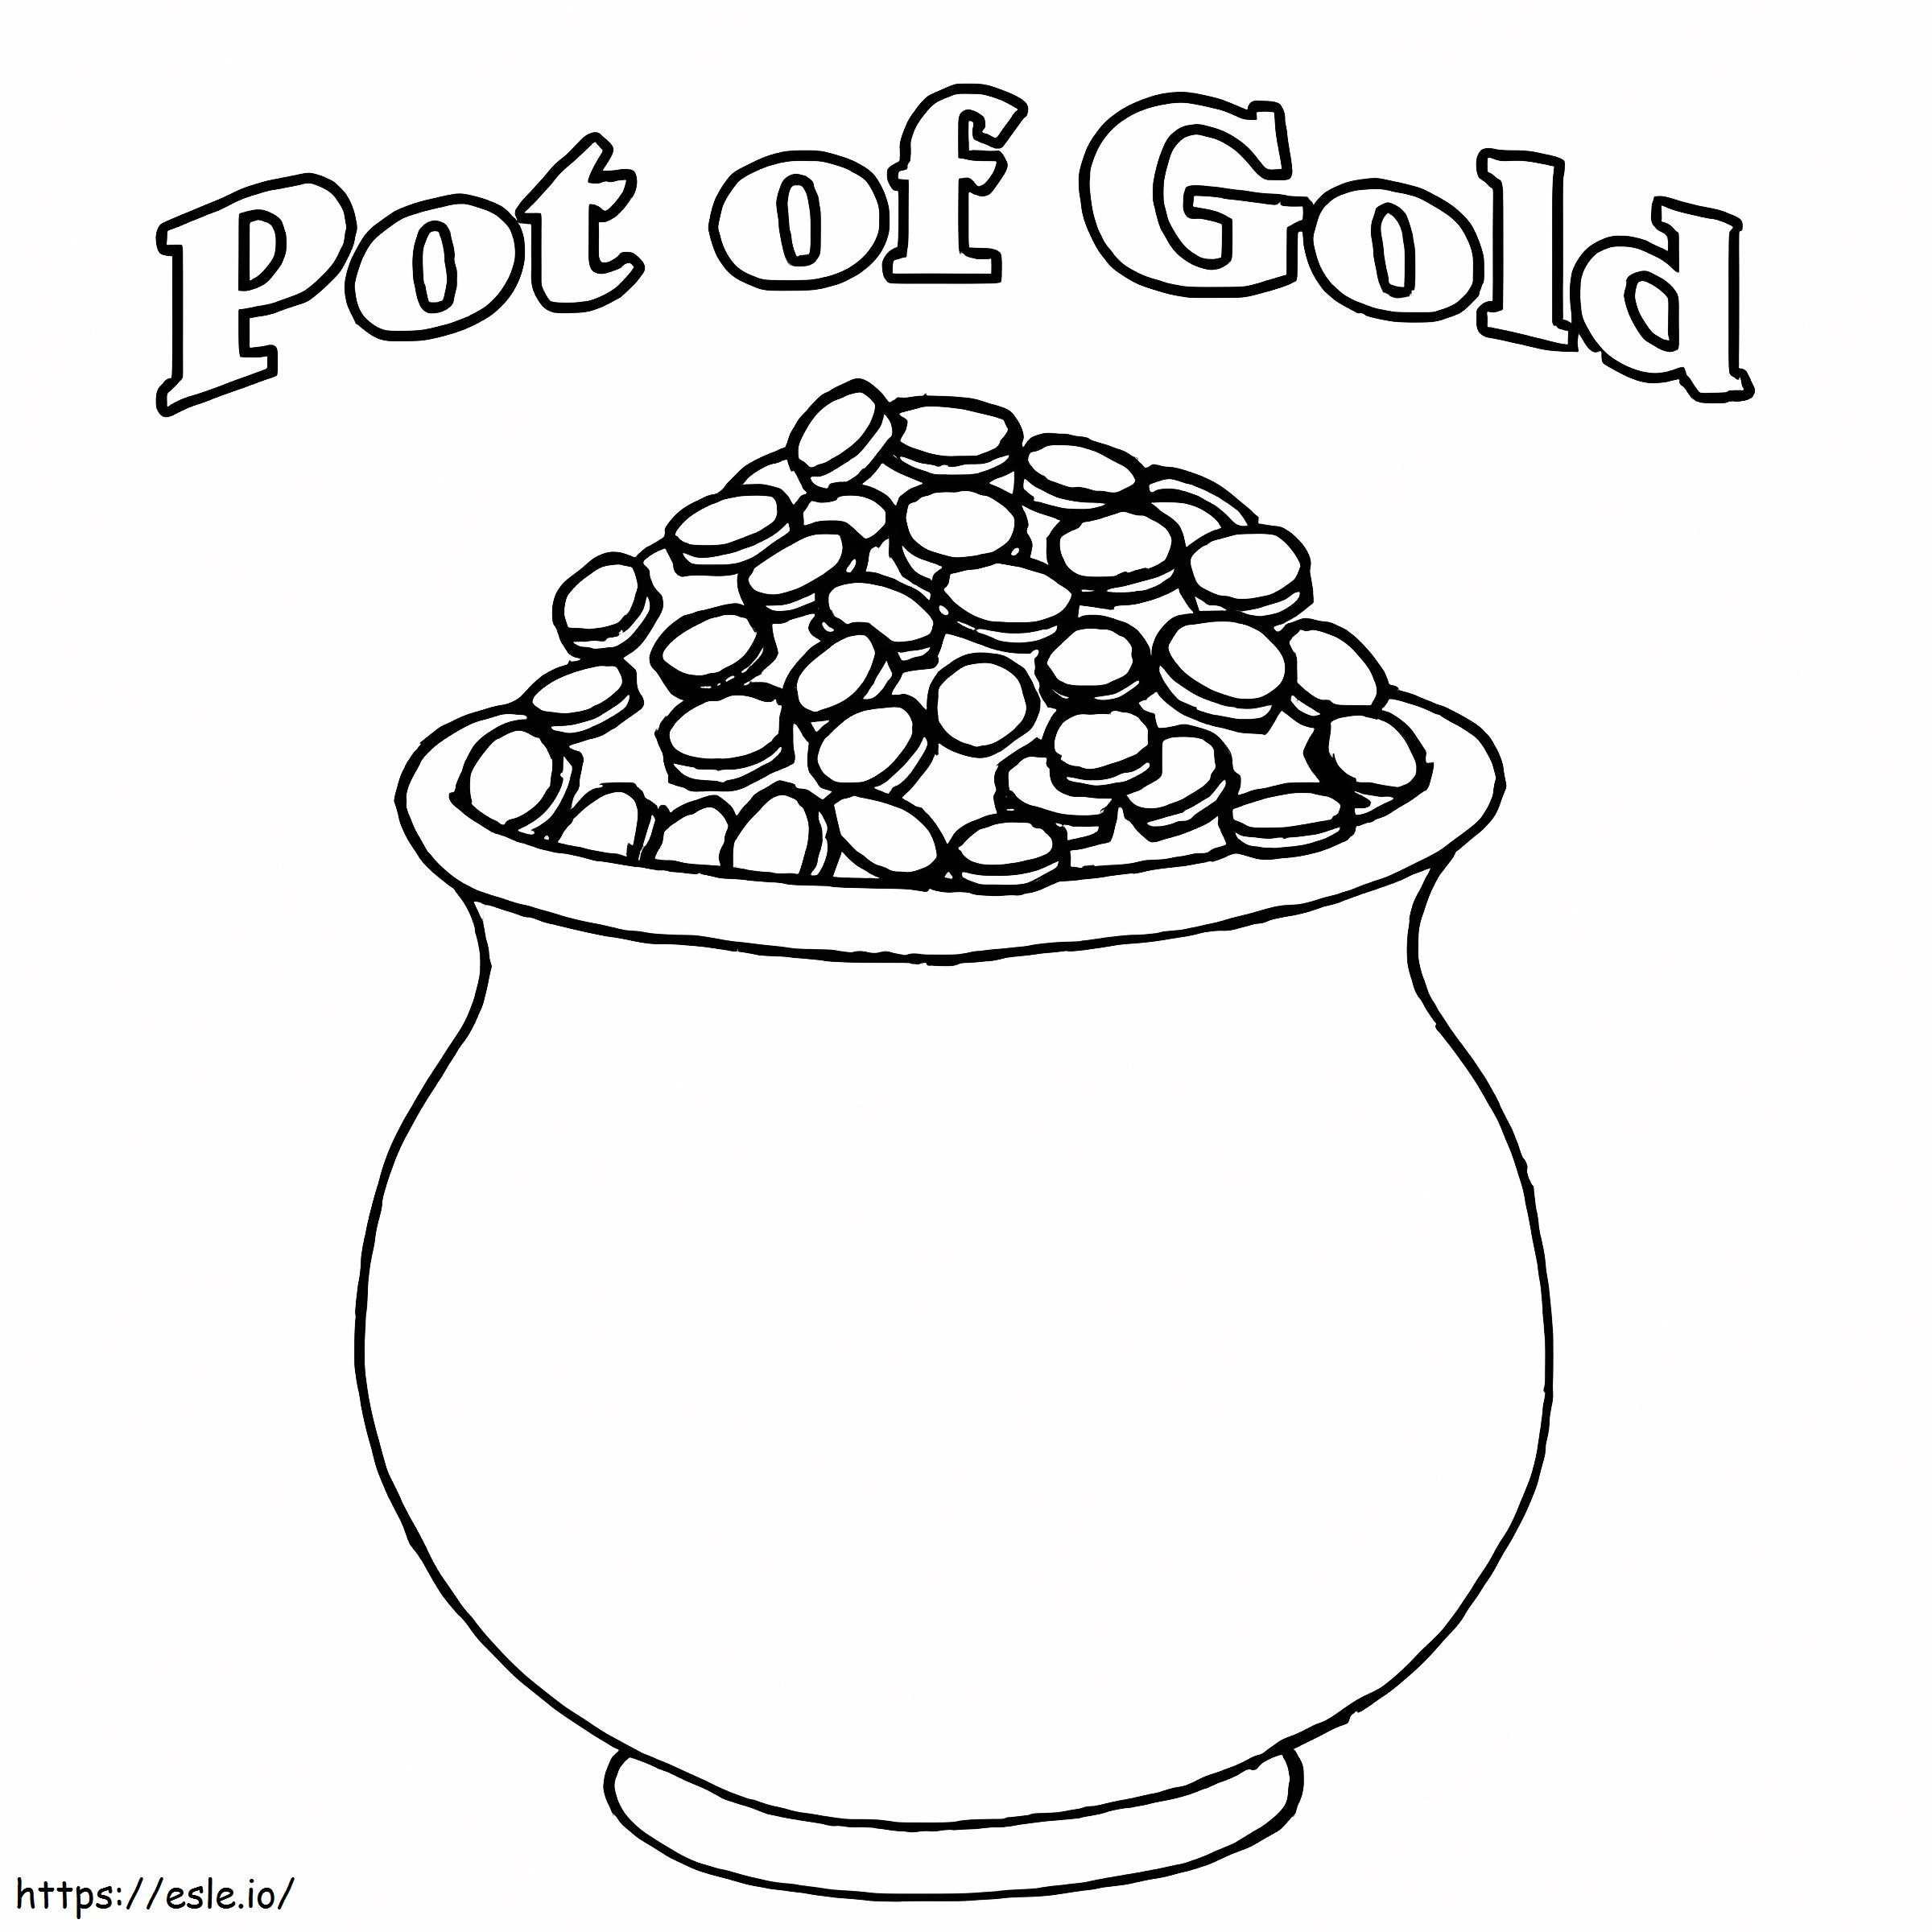 Pot Of Gold 20 coloring page